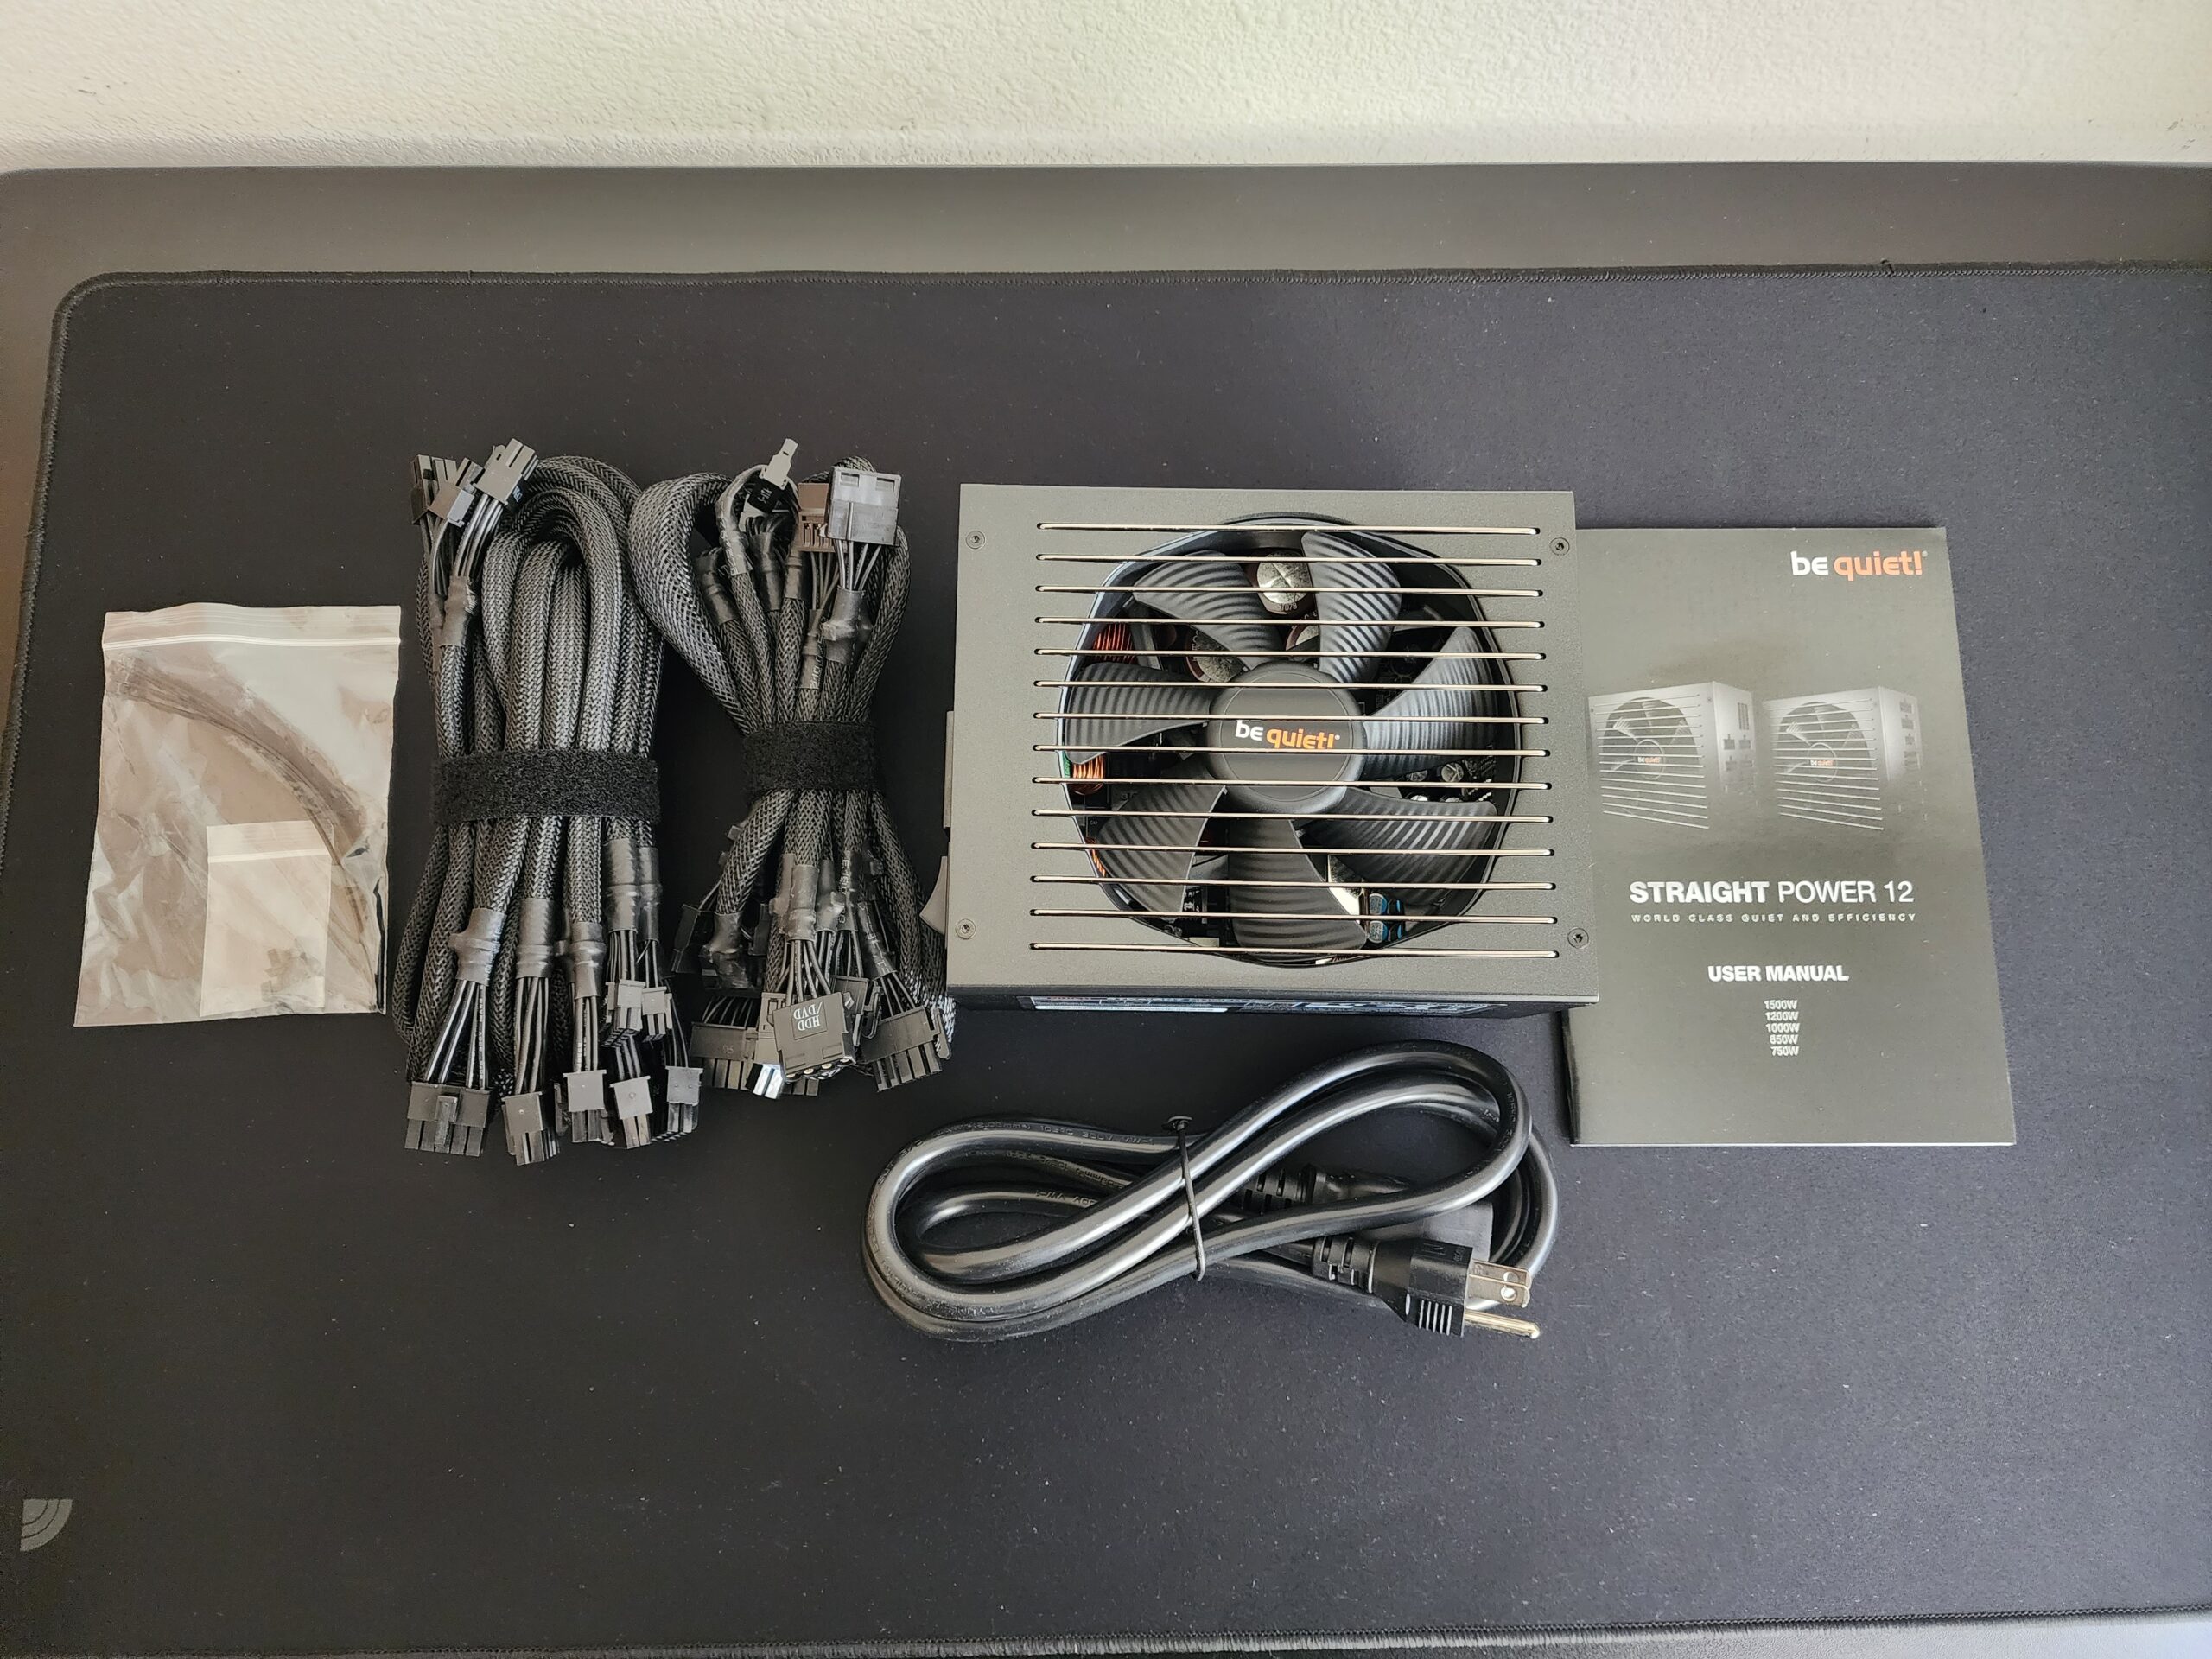 be quiet! Straight Power 12 1500W Power Supply Review